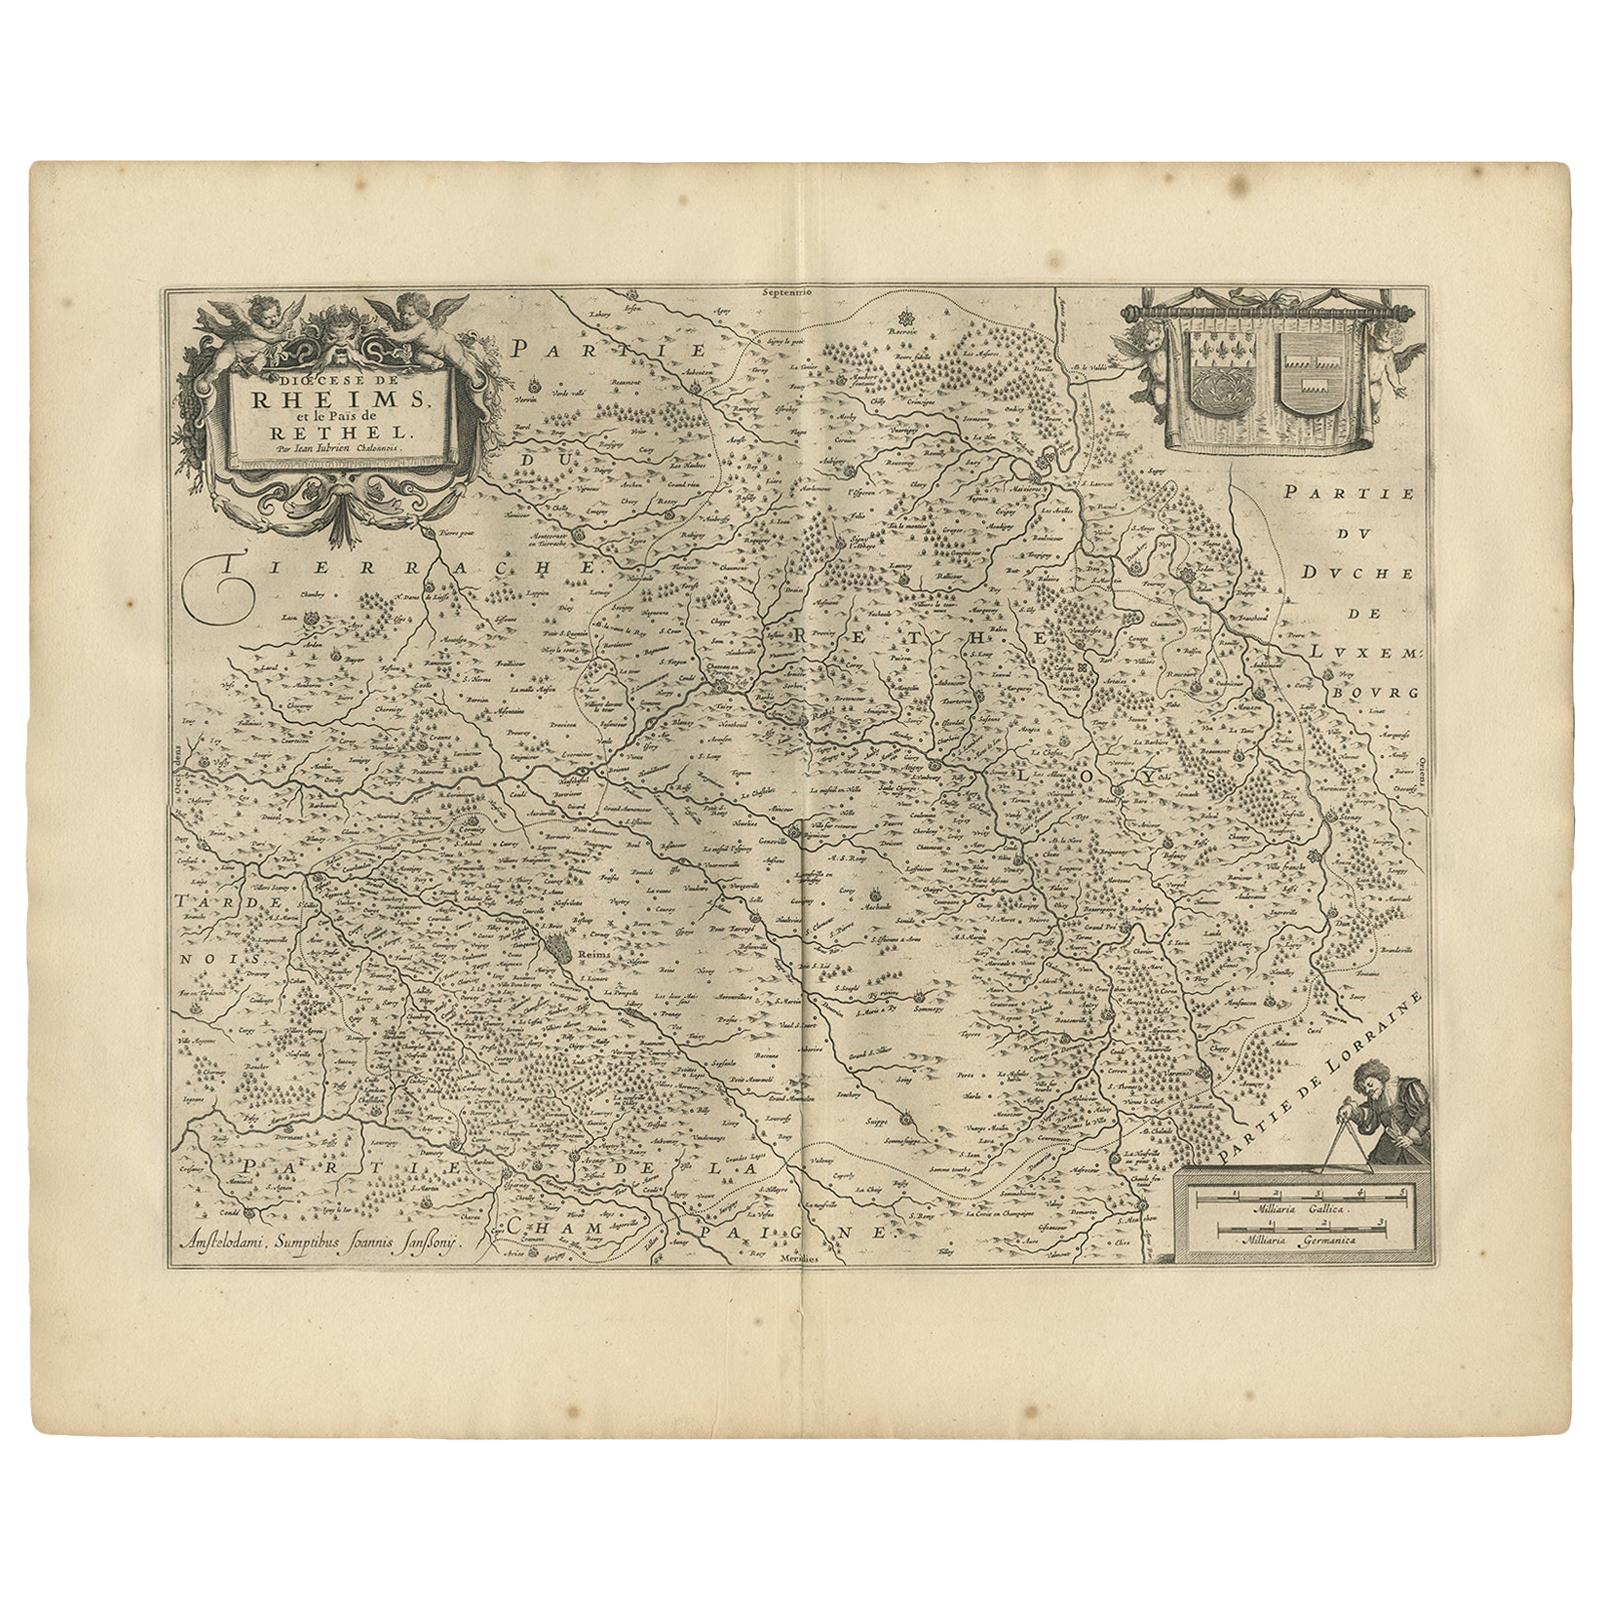 Antique Map of the Region of Rethelois by Janssonius, 1657